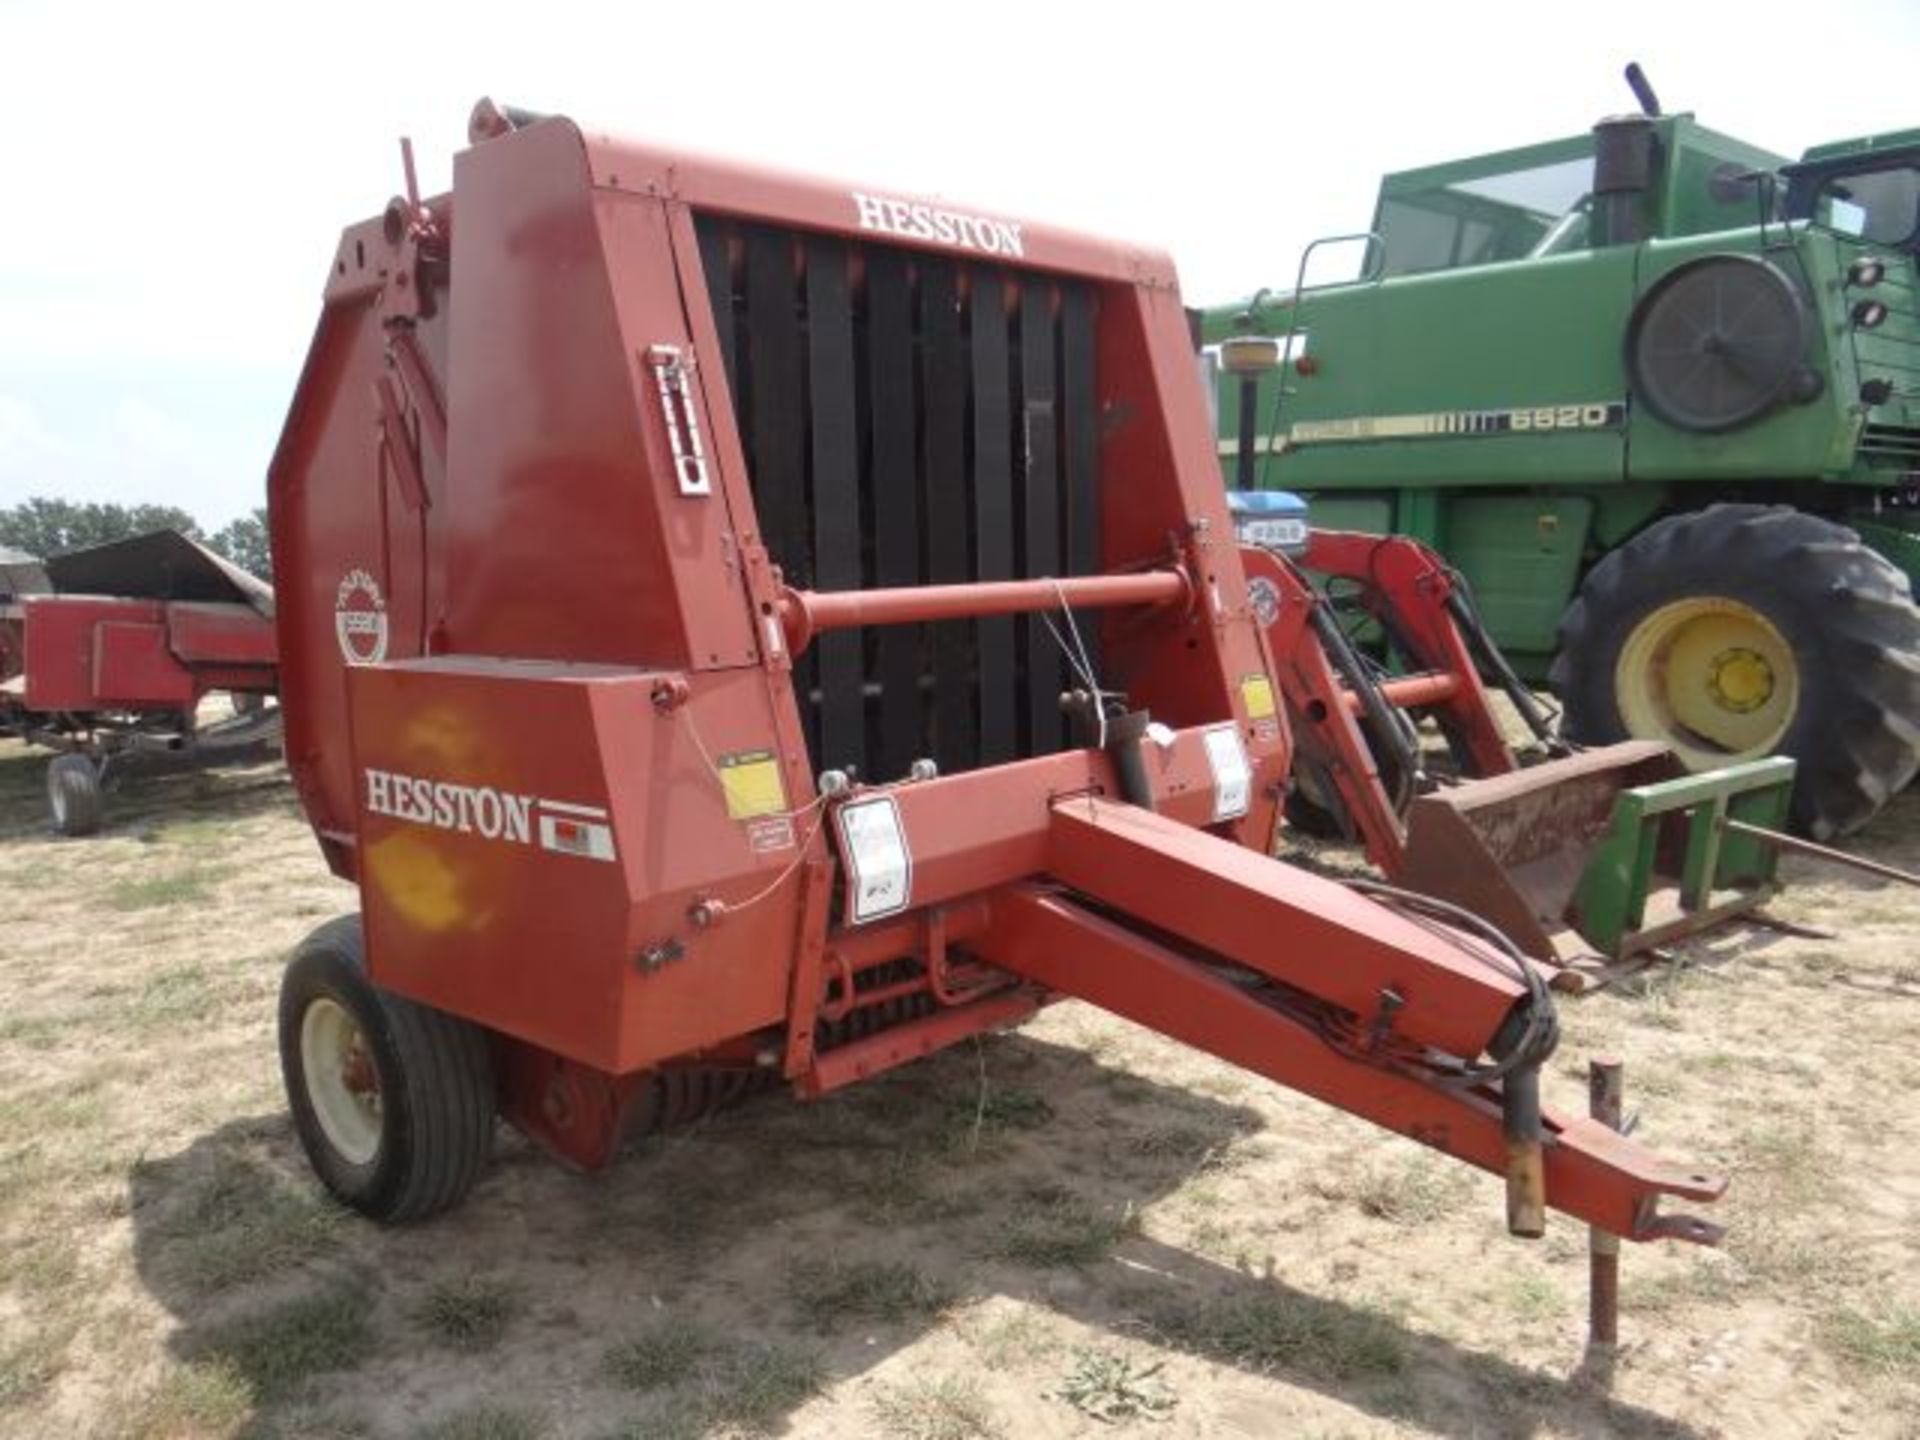 Hesston 5580 Round Baler Twine Only, Works Good, Monitor in the Shed - Image 2 of 3